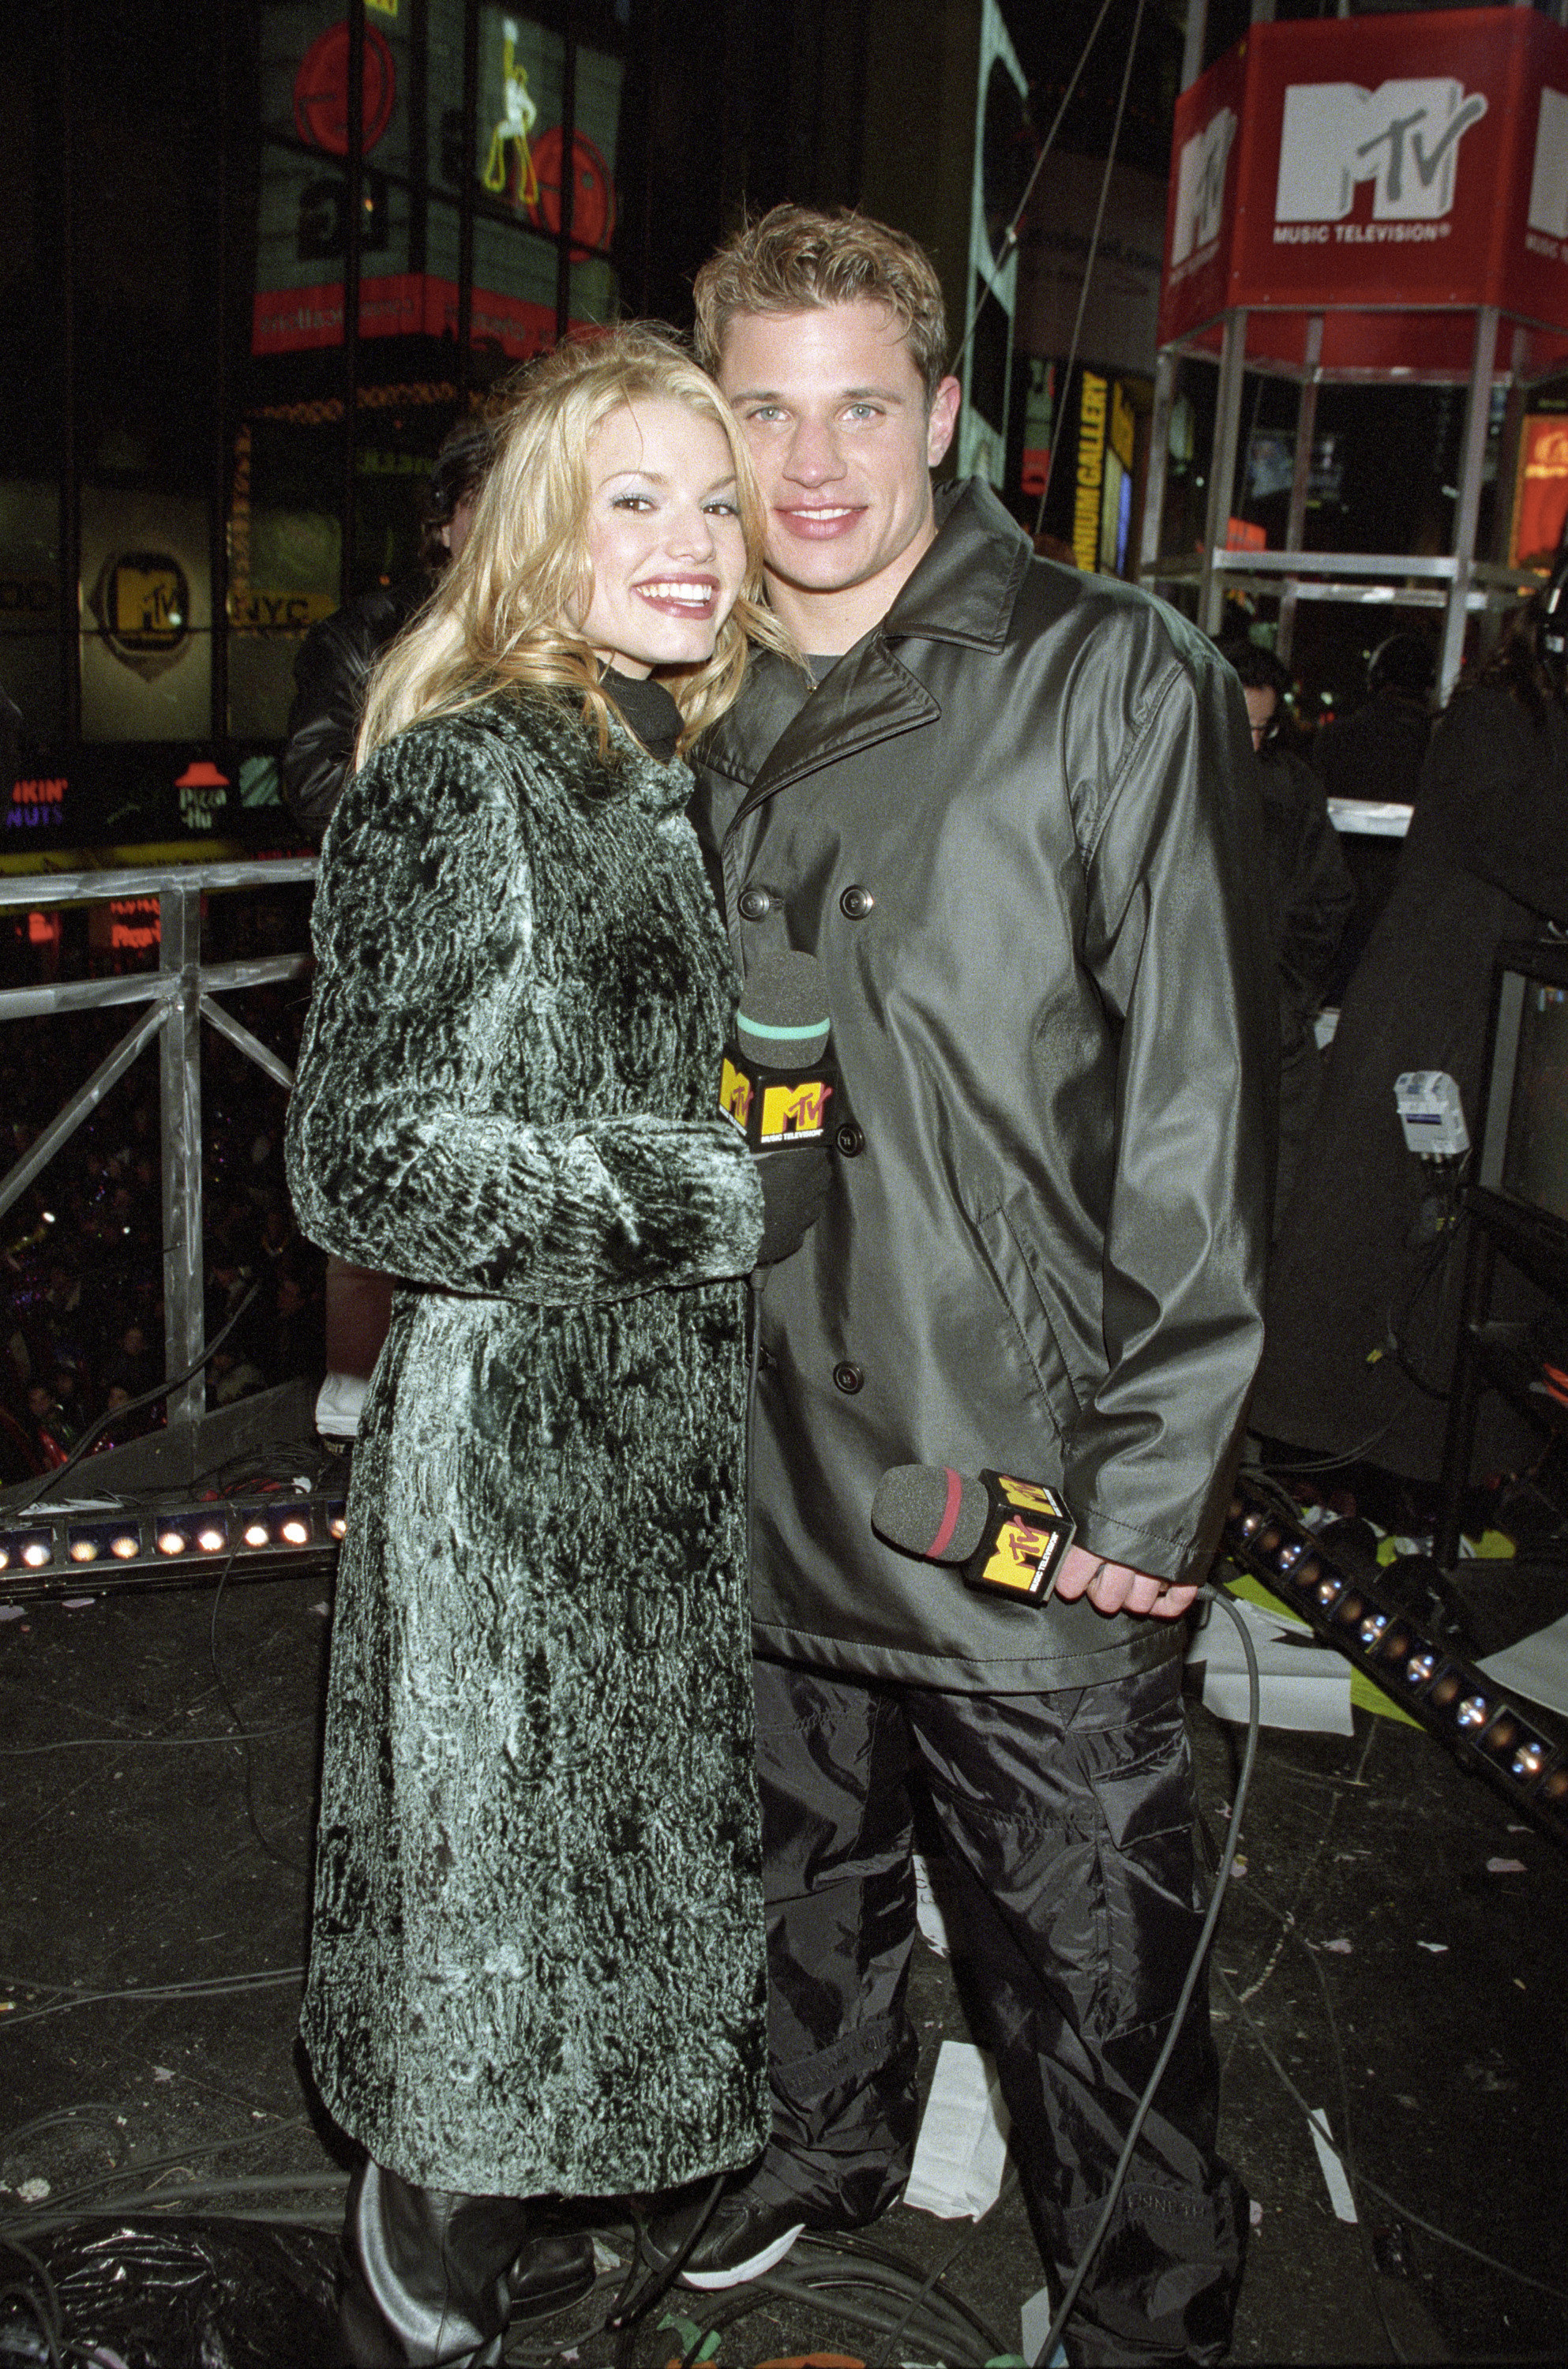 hosting mtv with then-husband nick lachey